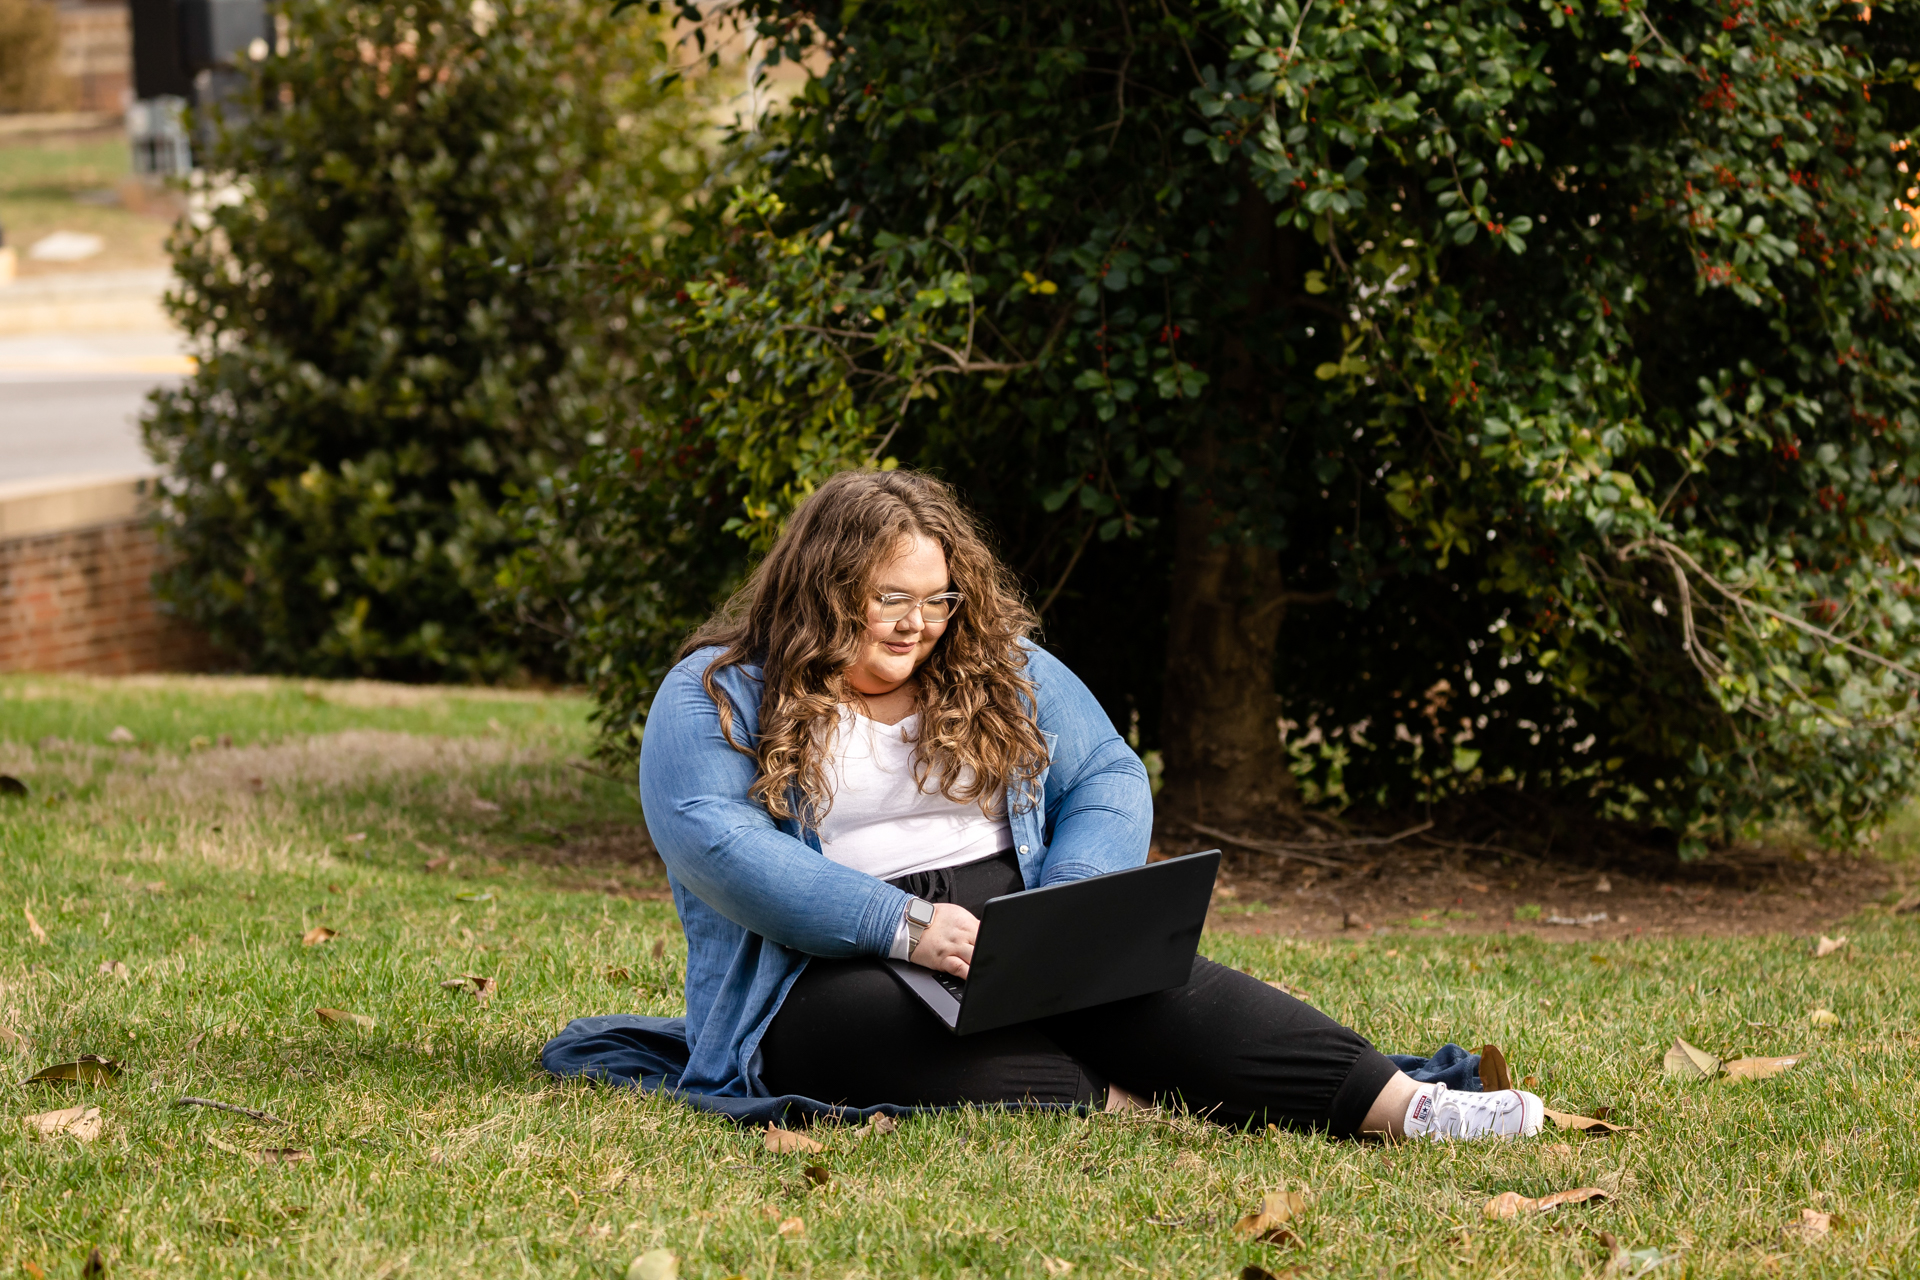 social work student working on her laptop in the grass